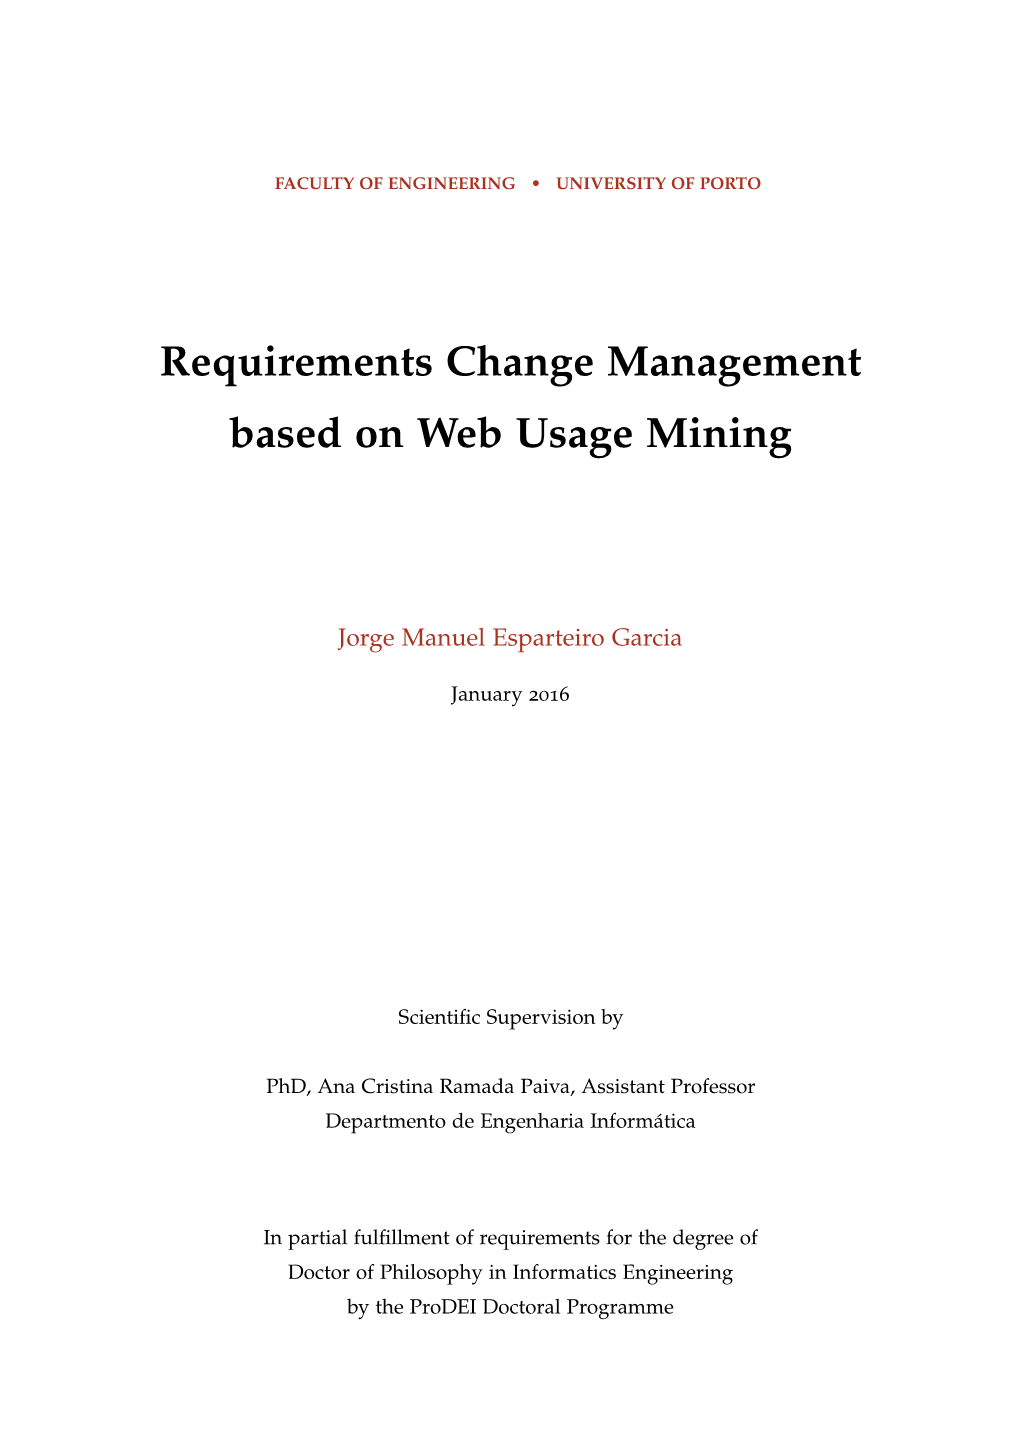 Requirements Change Management Based on Web Usage Mining